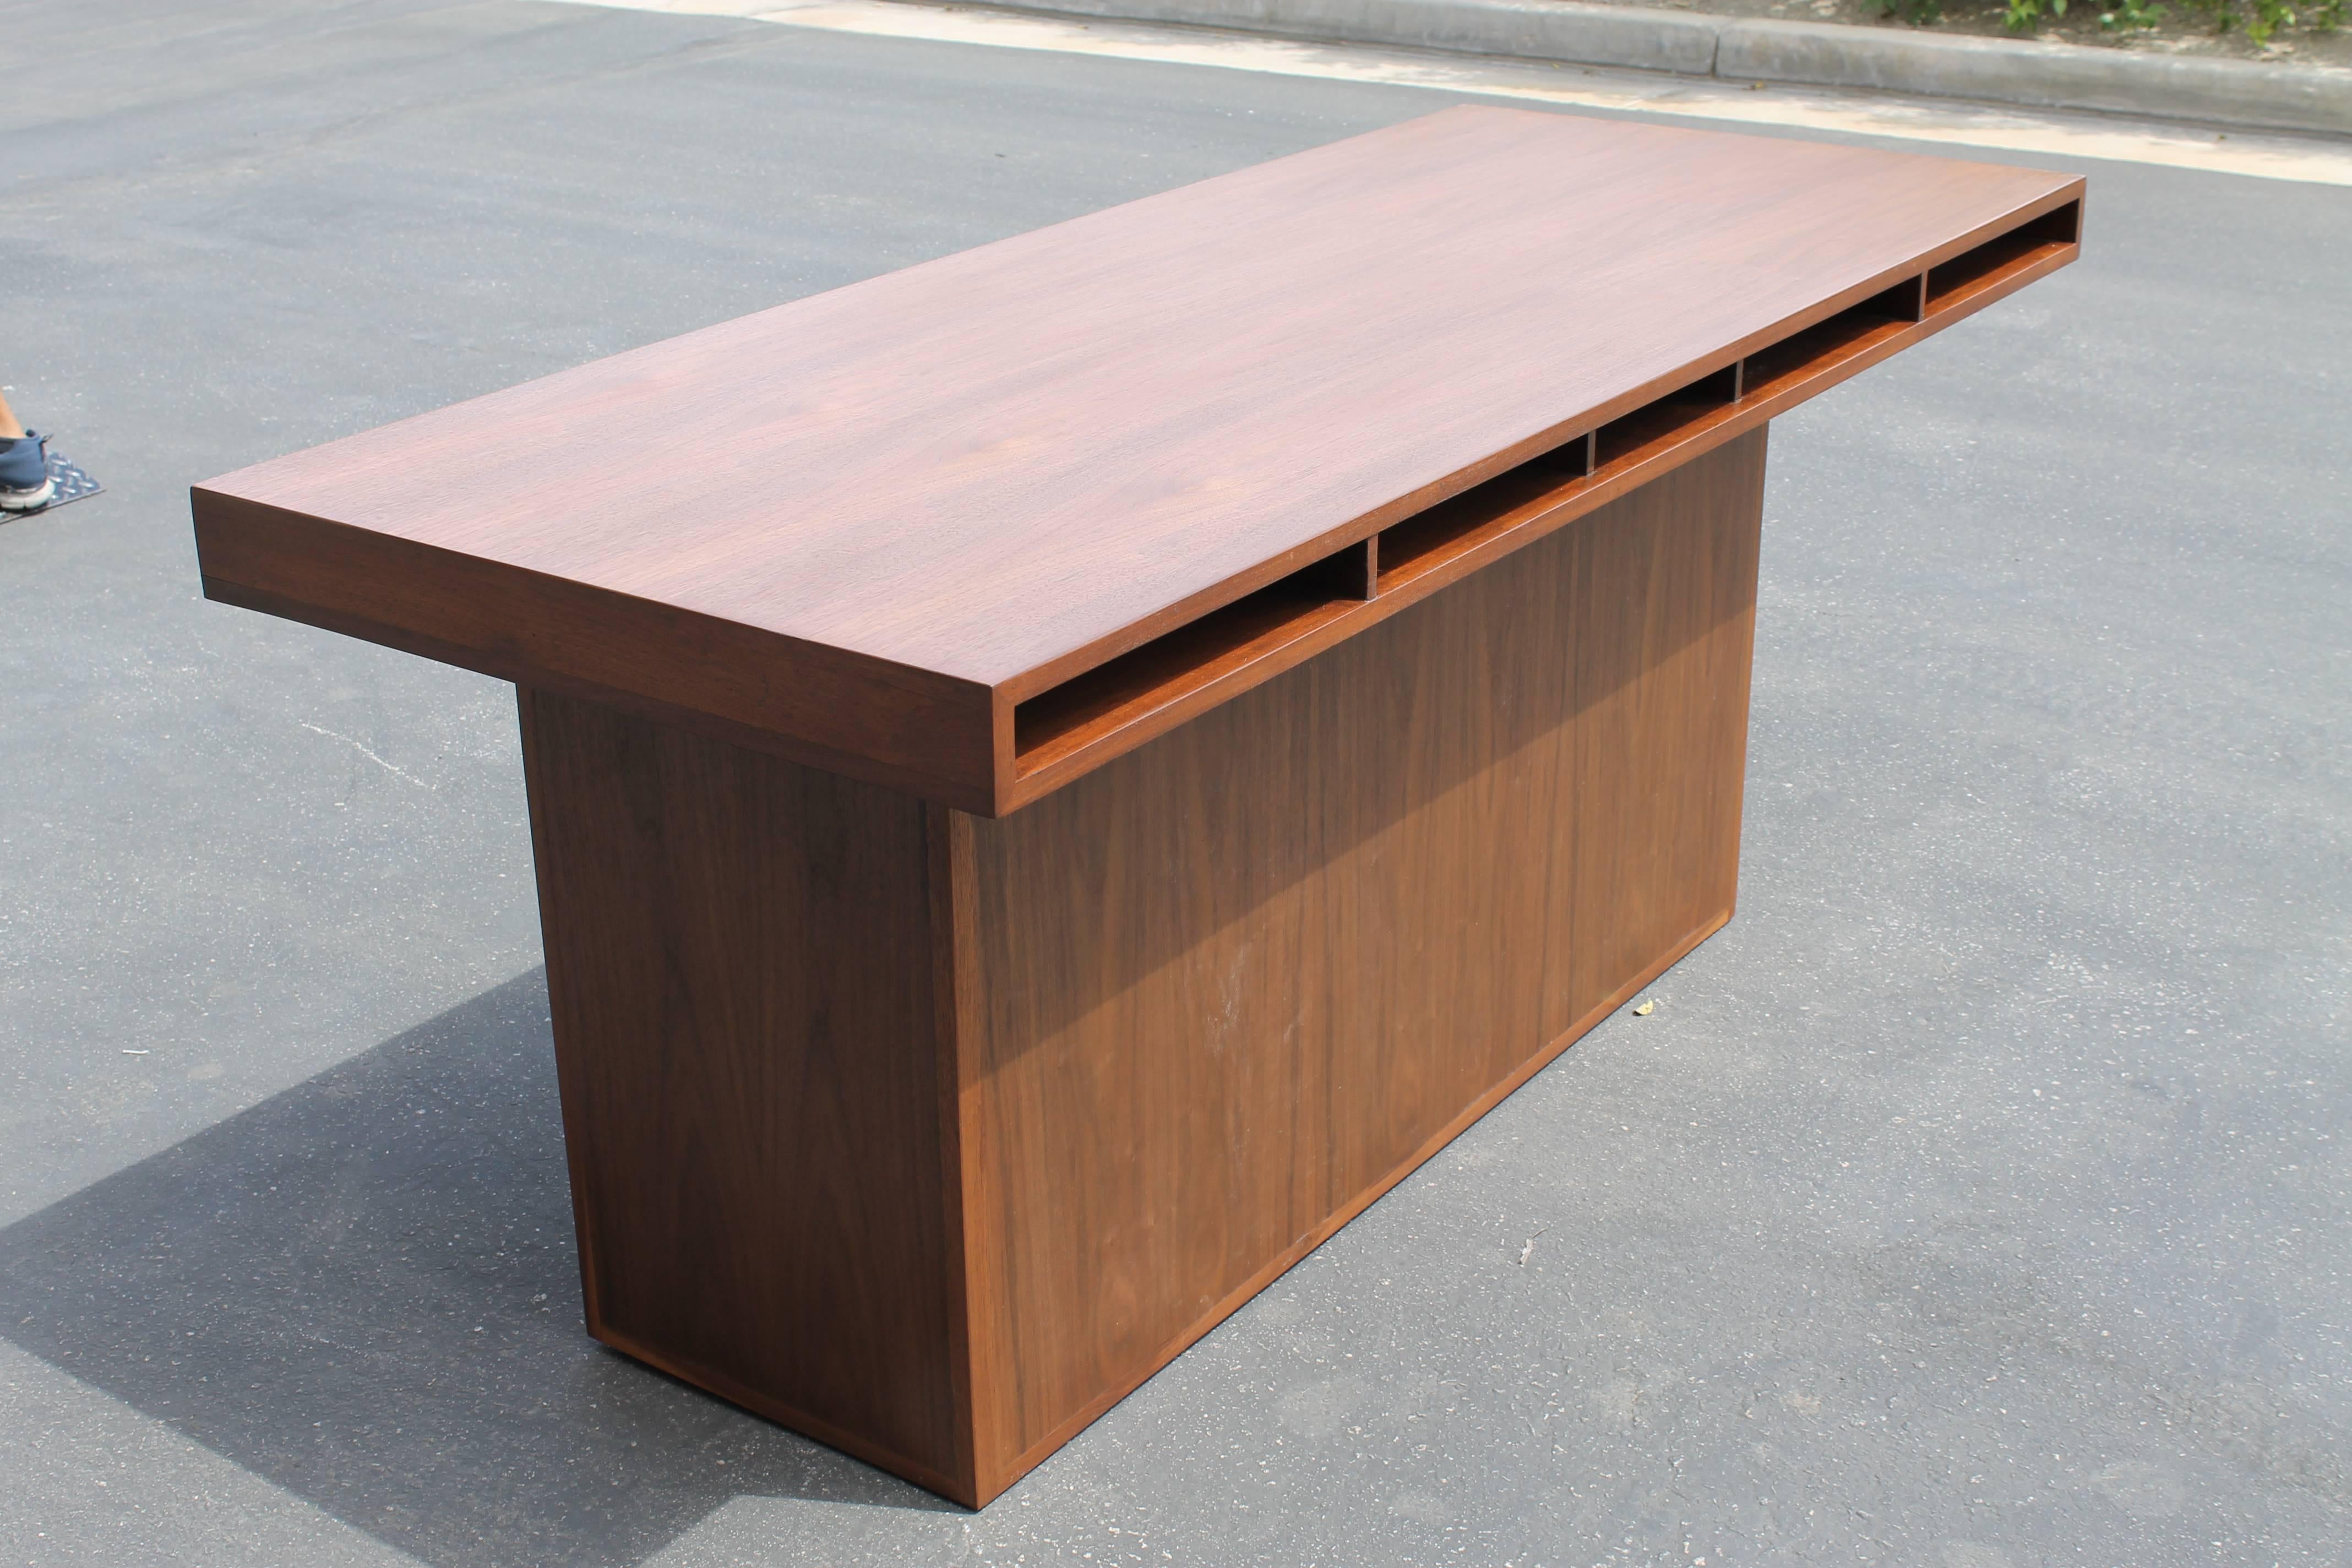 Beautiful desk signed Maria Bergson, October 1949. Desk was restored in walnut veneer. Single leg is our addition to this wonderful piece. It originally had a wood cabinet but, when we found it…it had a metal throw away cabinet which we discarded.